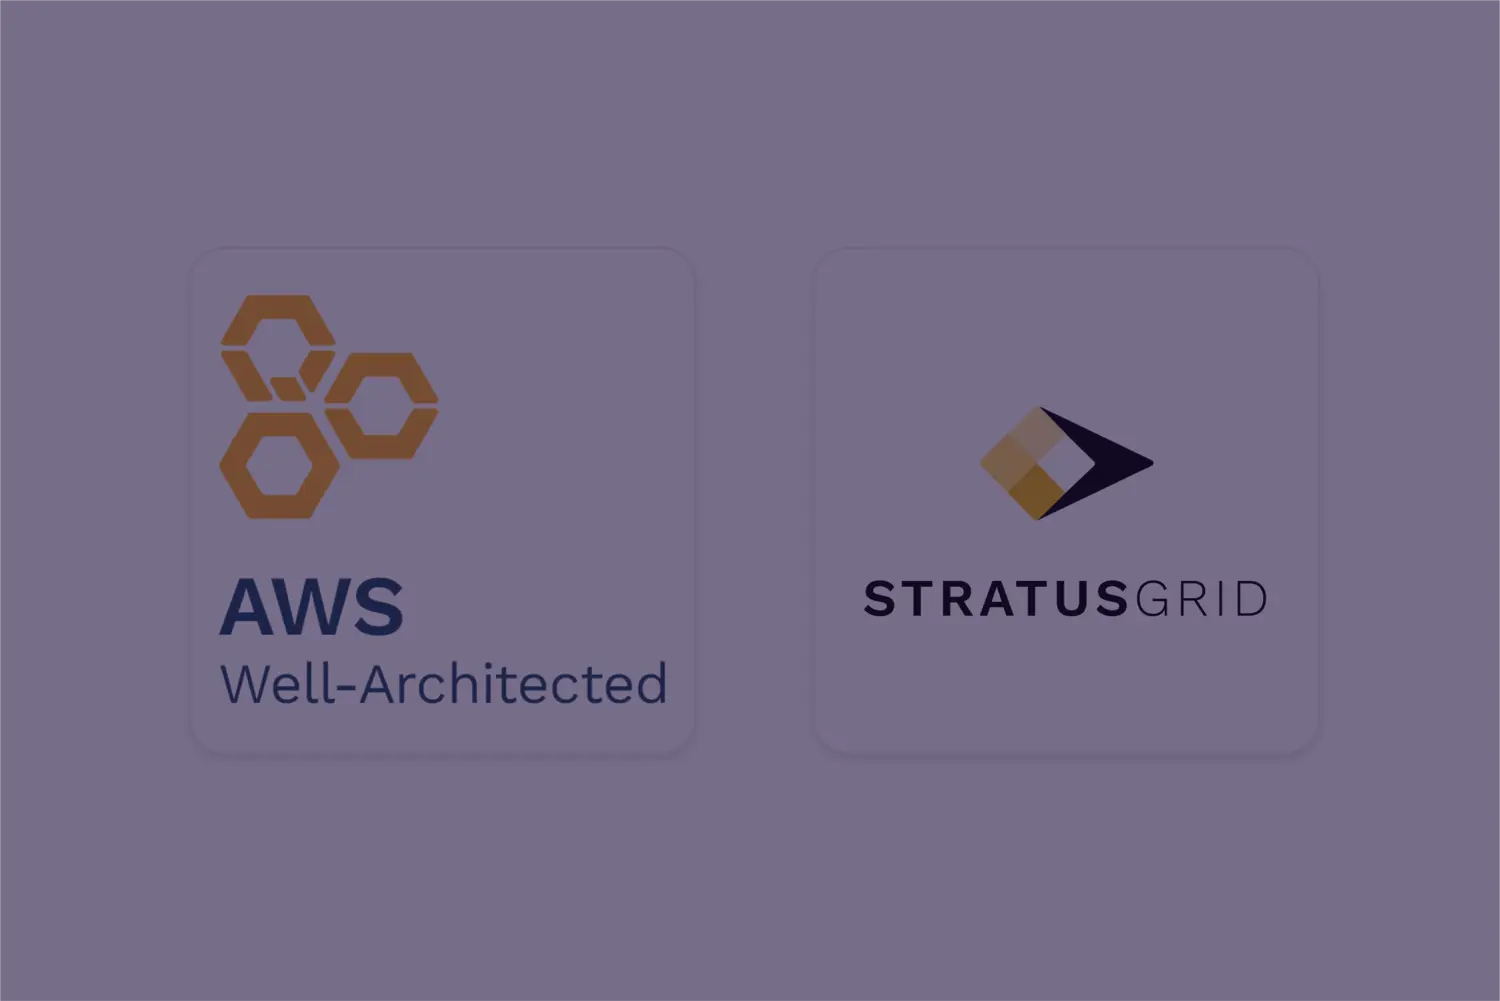 Press Release: StratusGrid Became an AWS Well-Architected Review Partner